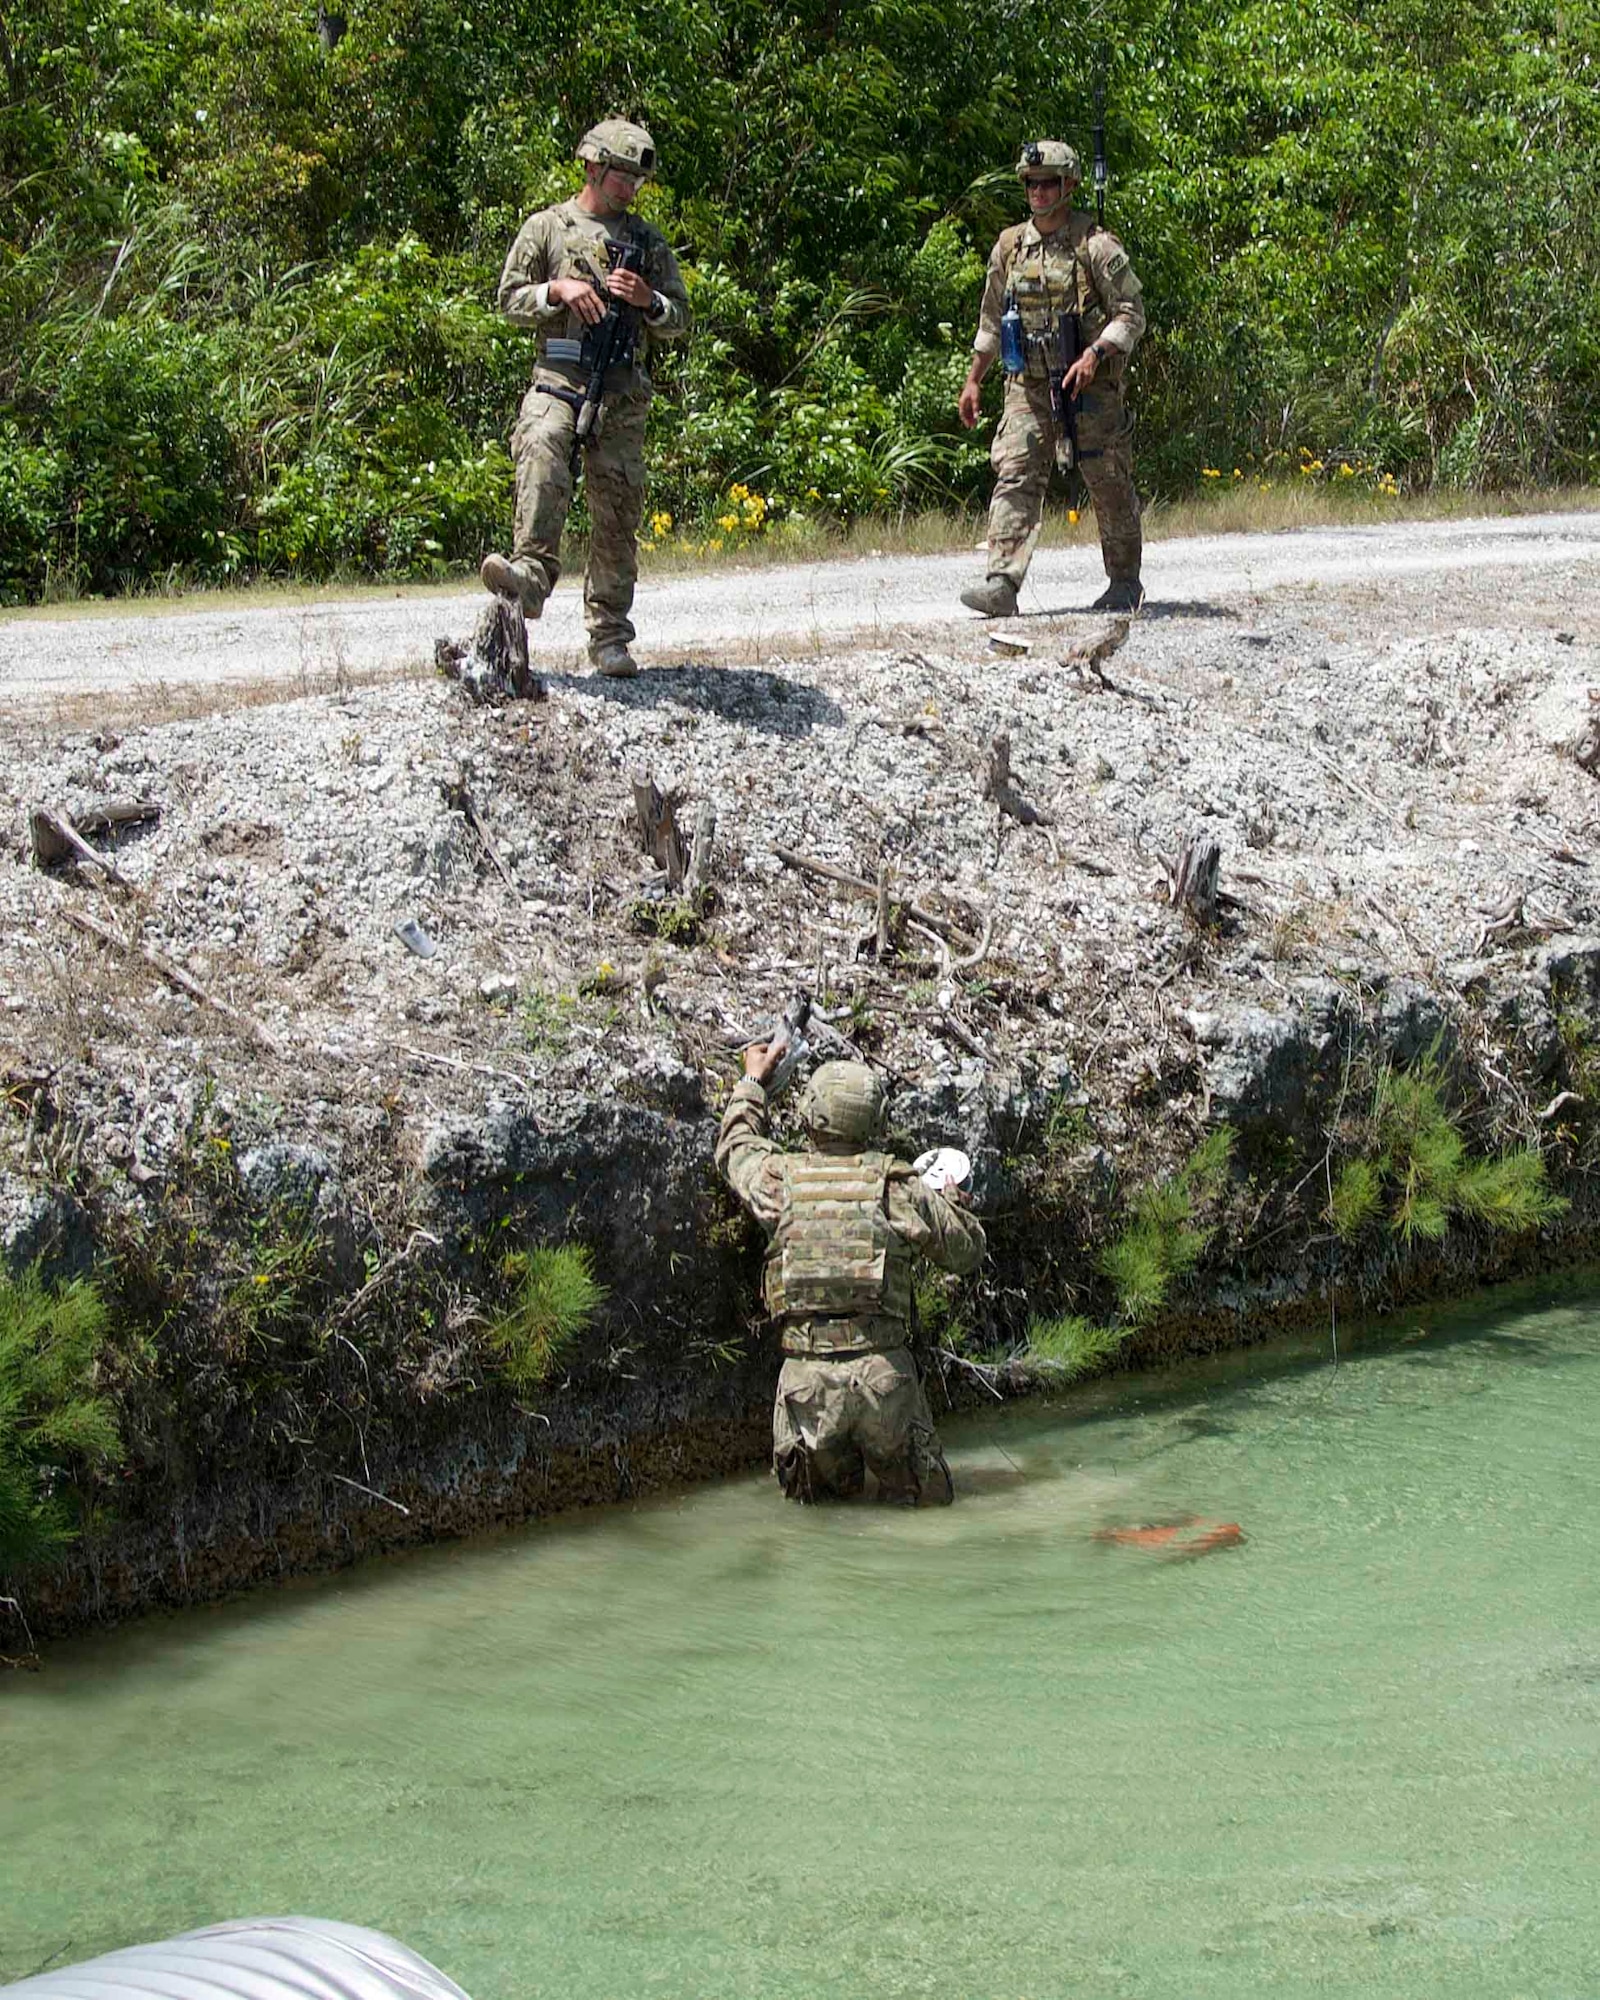 Staff Sgt. Richel Castillo, Staff Sgt. Miguel Hill team members and Tech. Sgt. Aaron Johns, team leader, from the 482nd Civil Engineering Squadron Explosive Ordnance Disposal Flight, build and place a charge on an improvised explosive device in the water at Homestead Air Reserve Base, Fla., April 7. The EOD Flight conducted dismounted counter-IED operations as part of a weeklong training exercise aimed to prepare the reservists for combat operations. (U.S. Air Force photo by Staff Sgt. Jaimi L. Upthegrove)